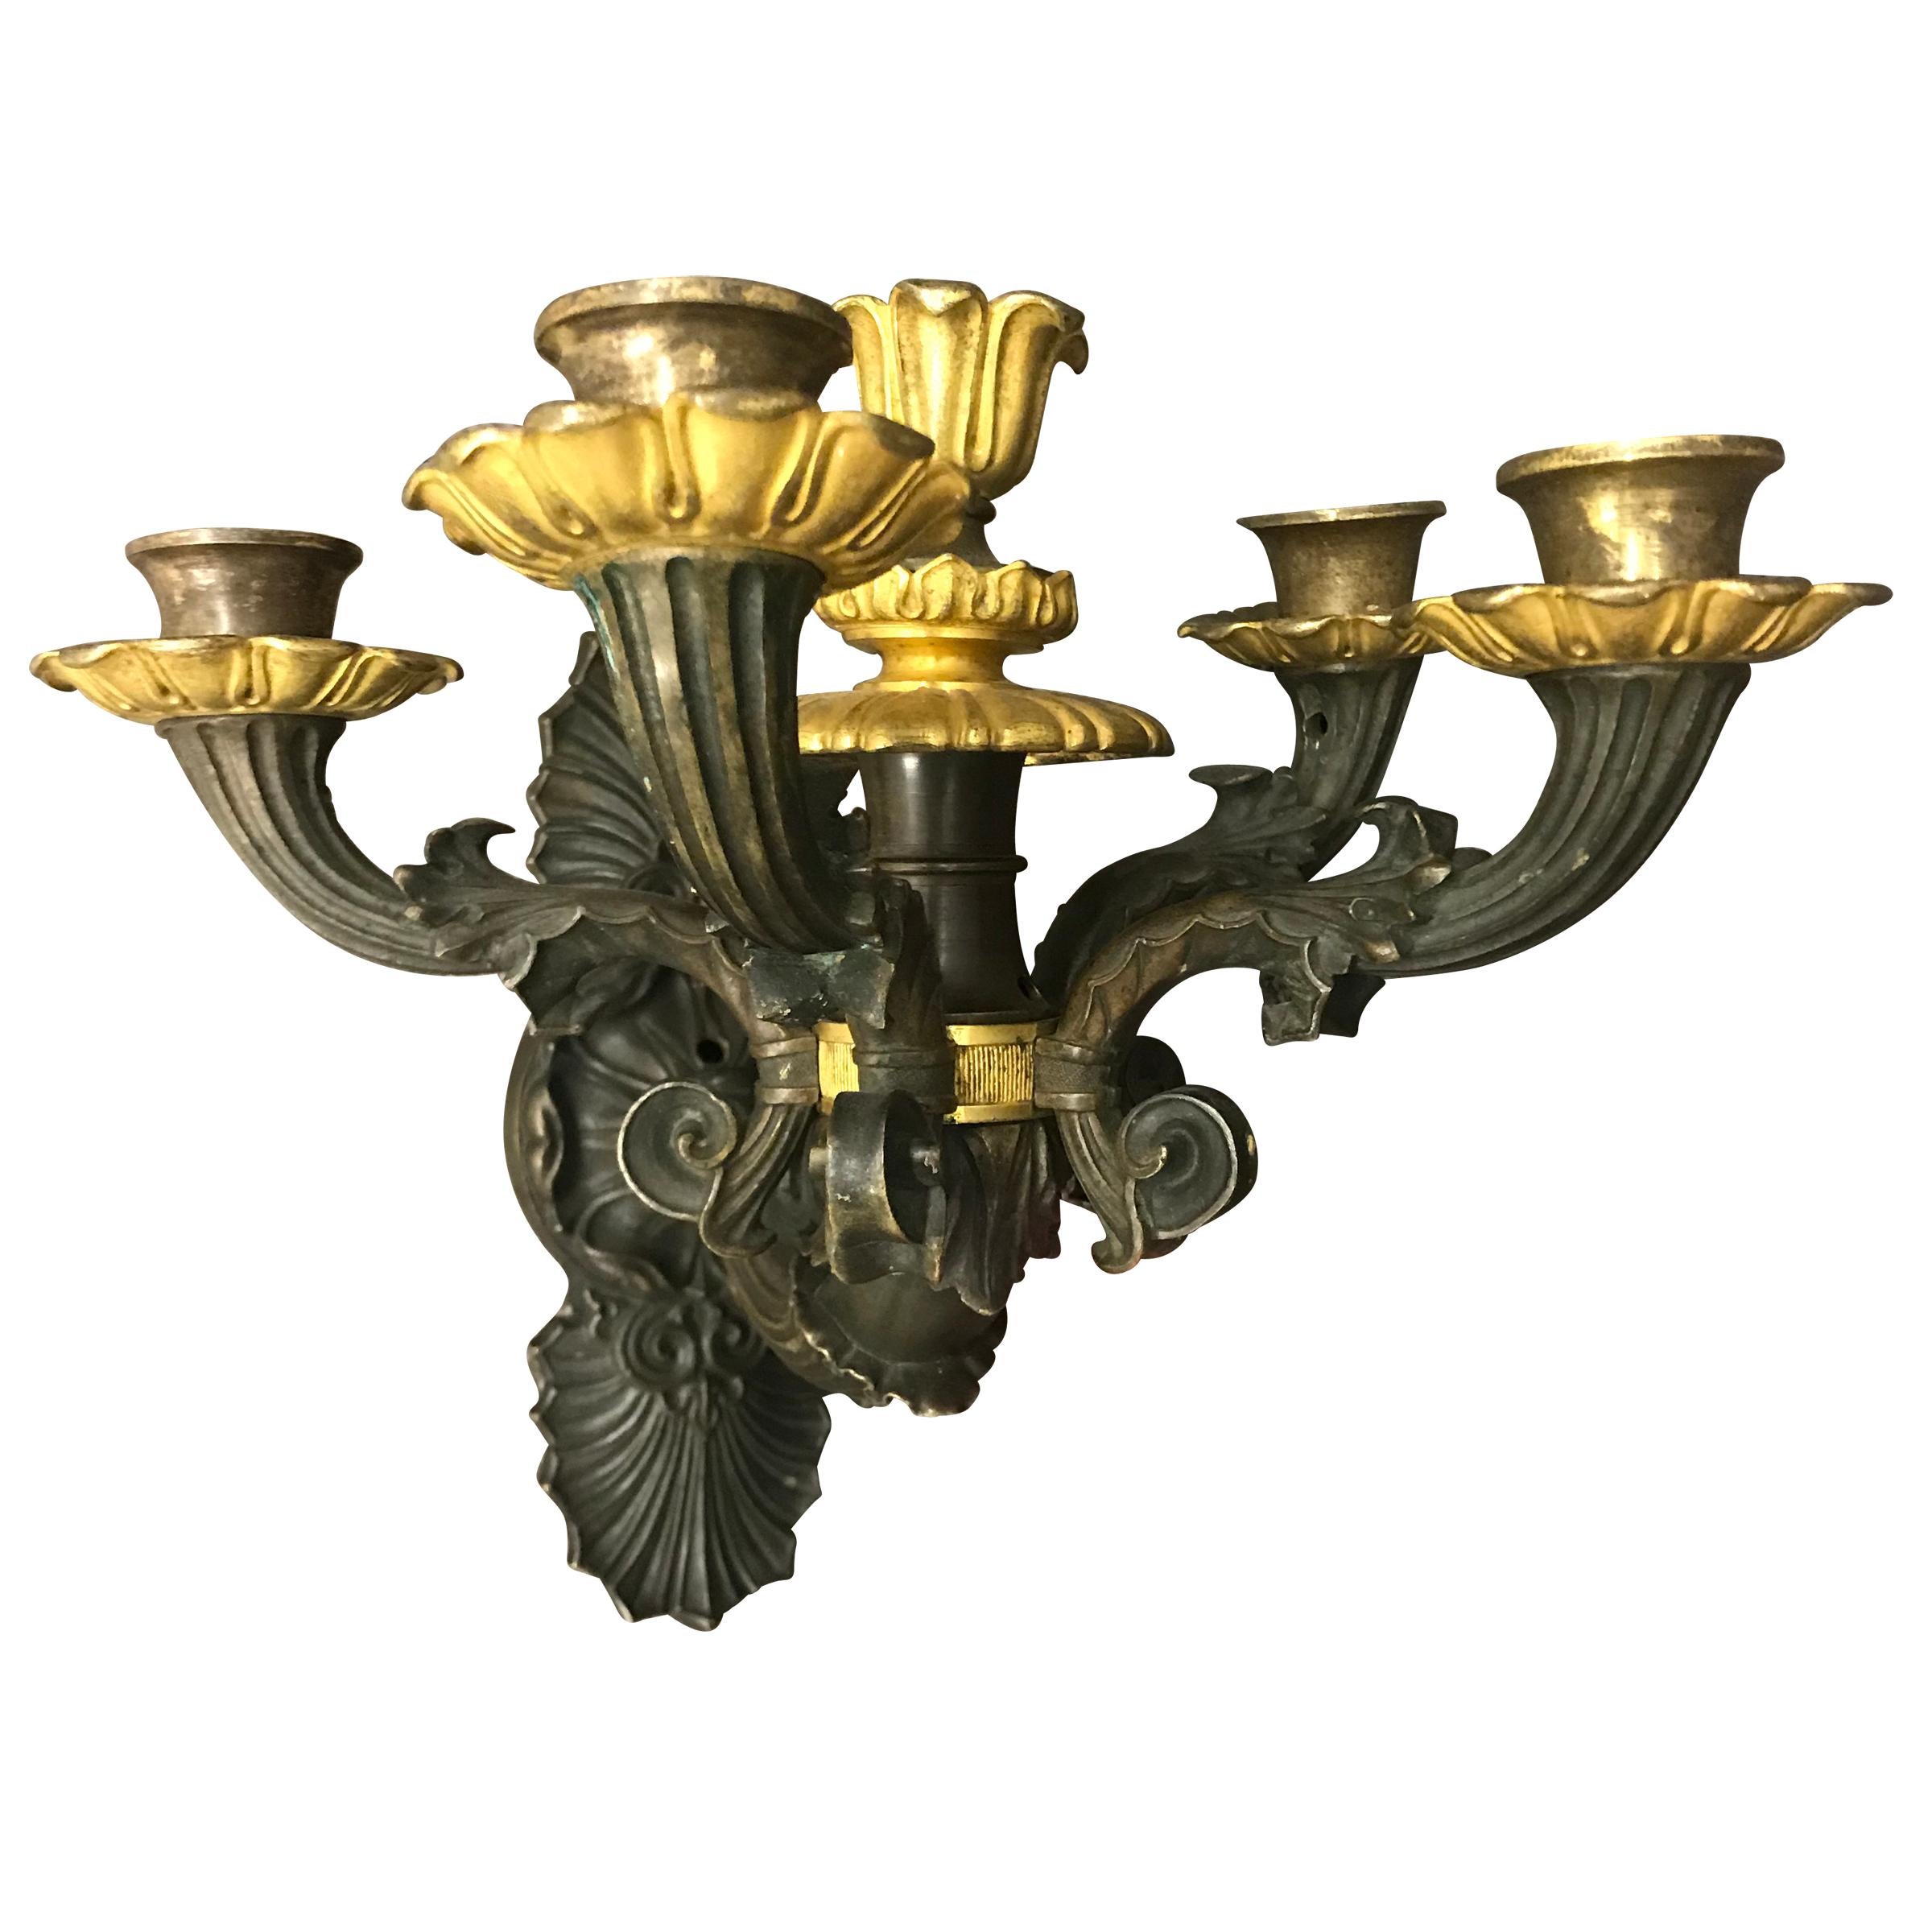 An early 19th century French Charles X cast bronze four-arm wall sconce with gilt bronze candle cups and floral-form bobeches. An additional candle cup with gilt bronze details is in the centre. Sconce has been drilled for wiring, but will need to